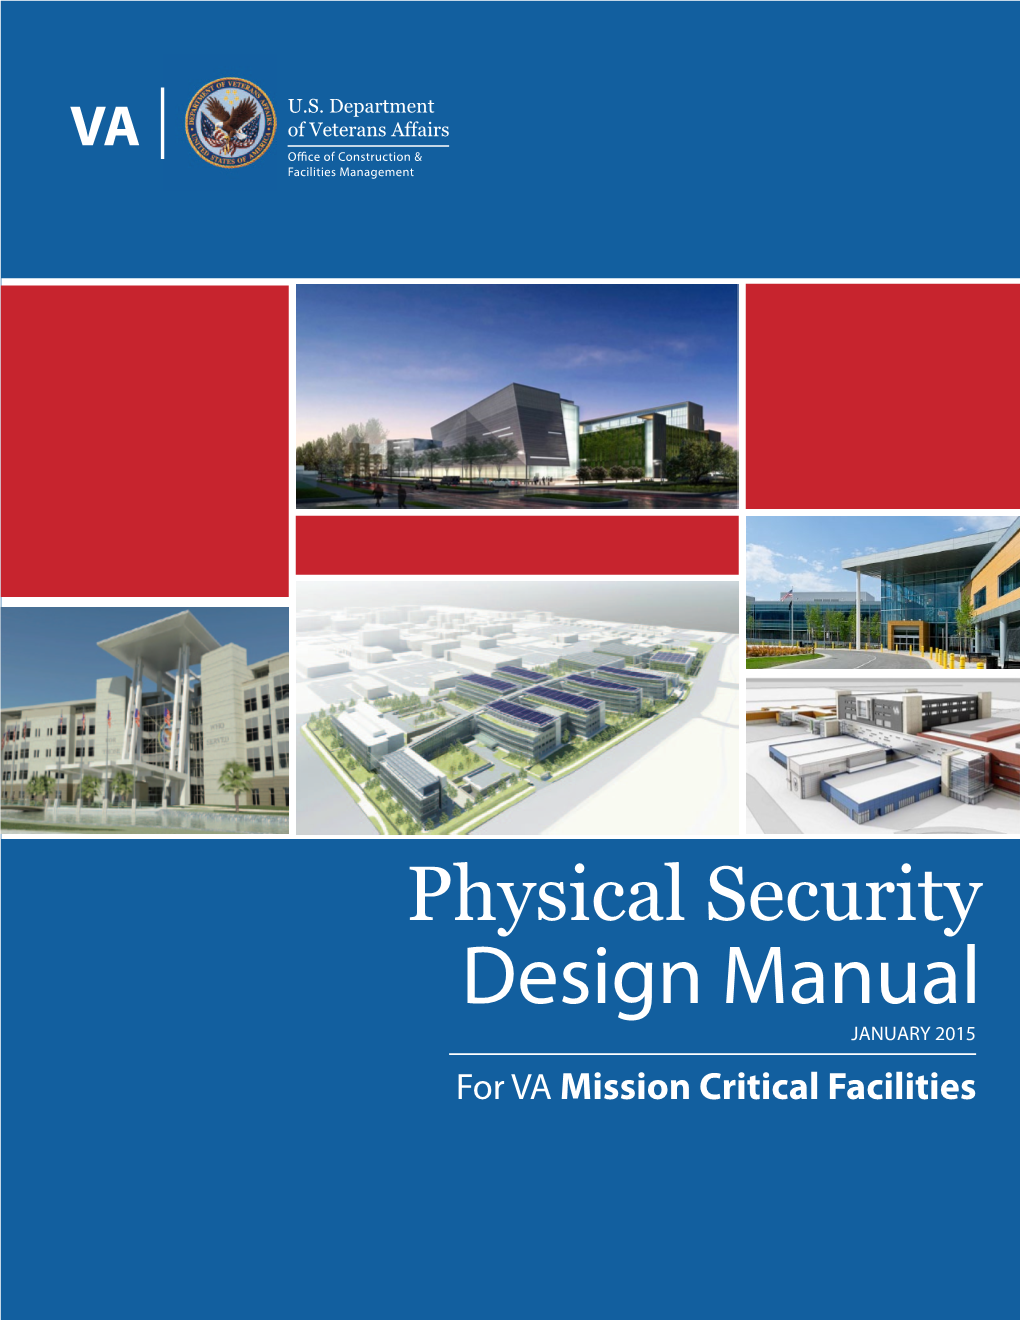 Physical Security Design Manual for Mission Critical Facilities